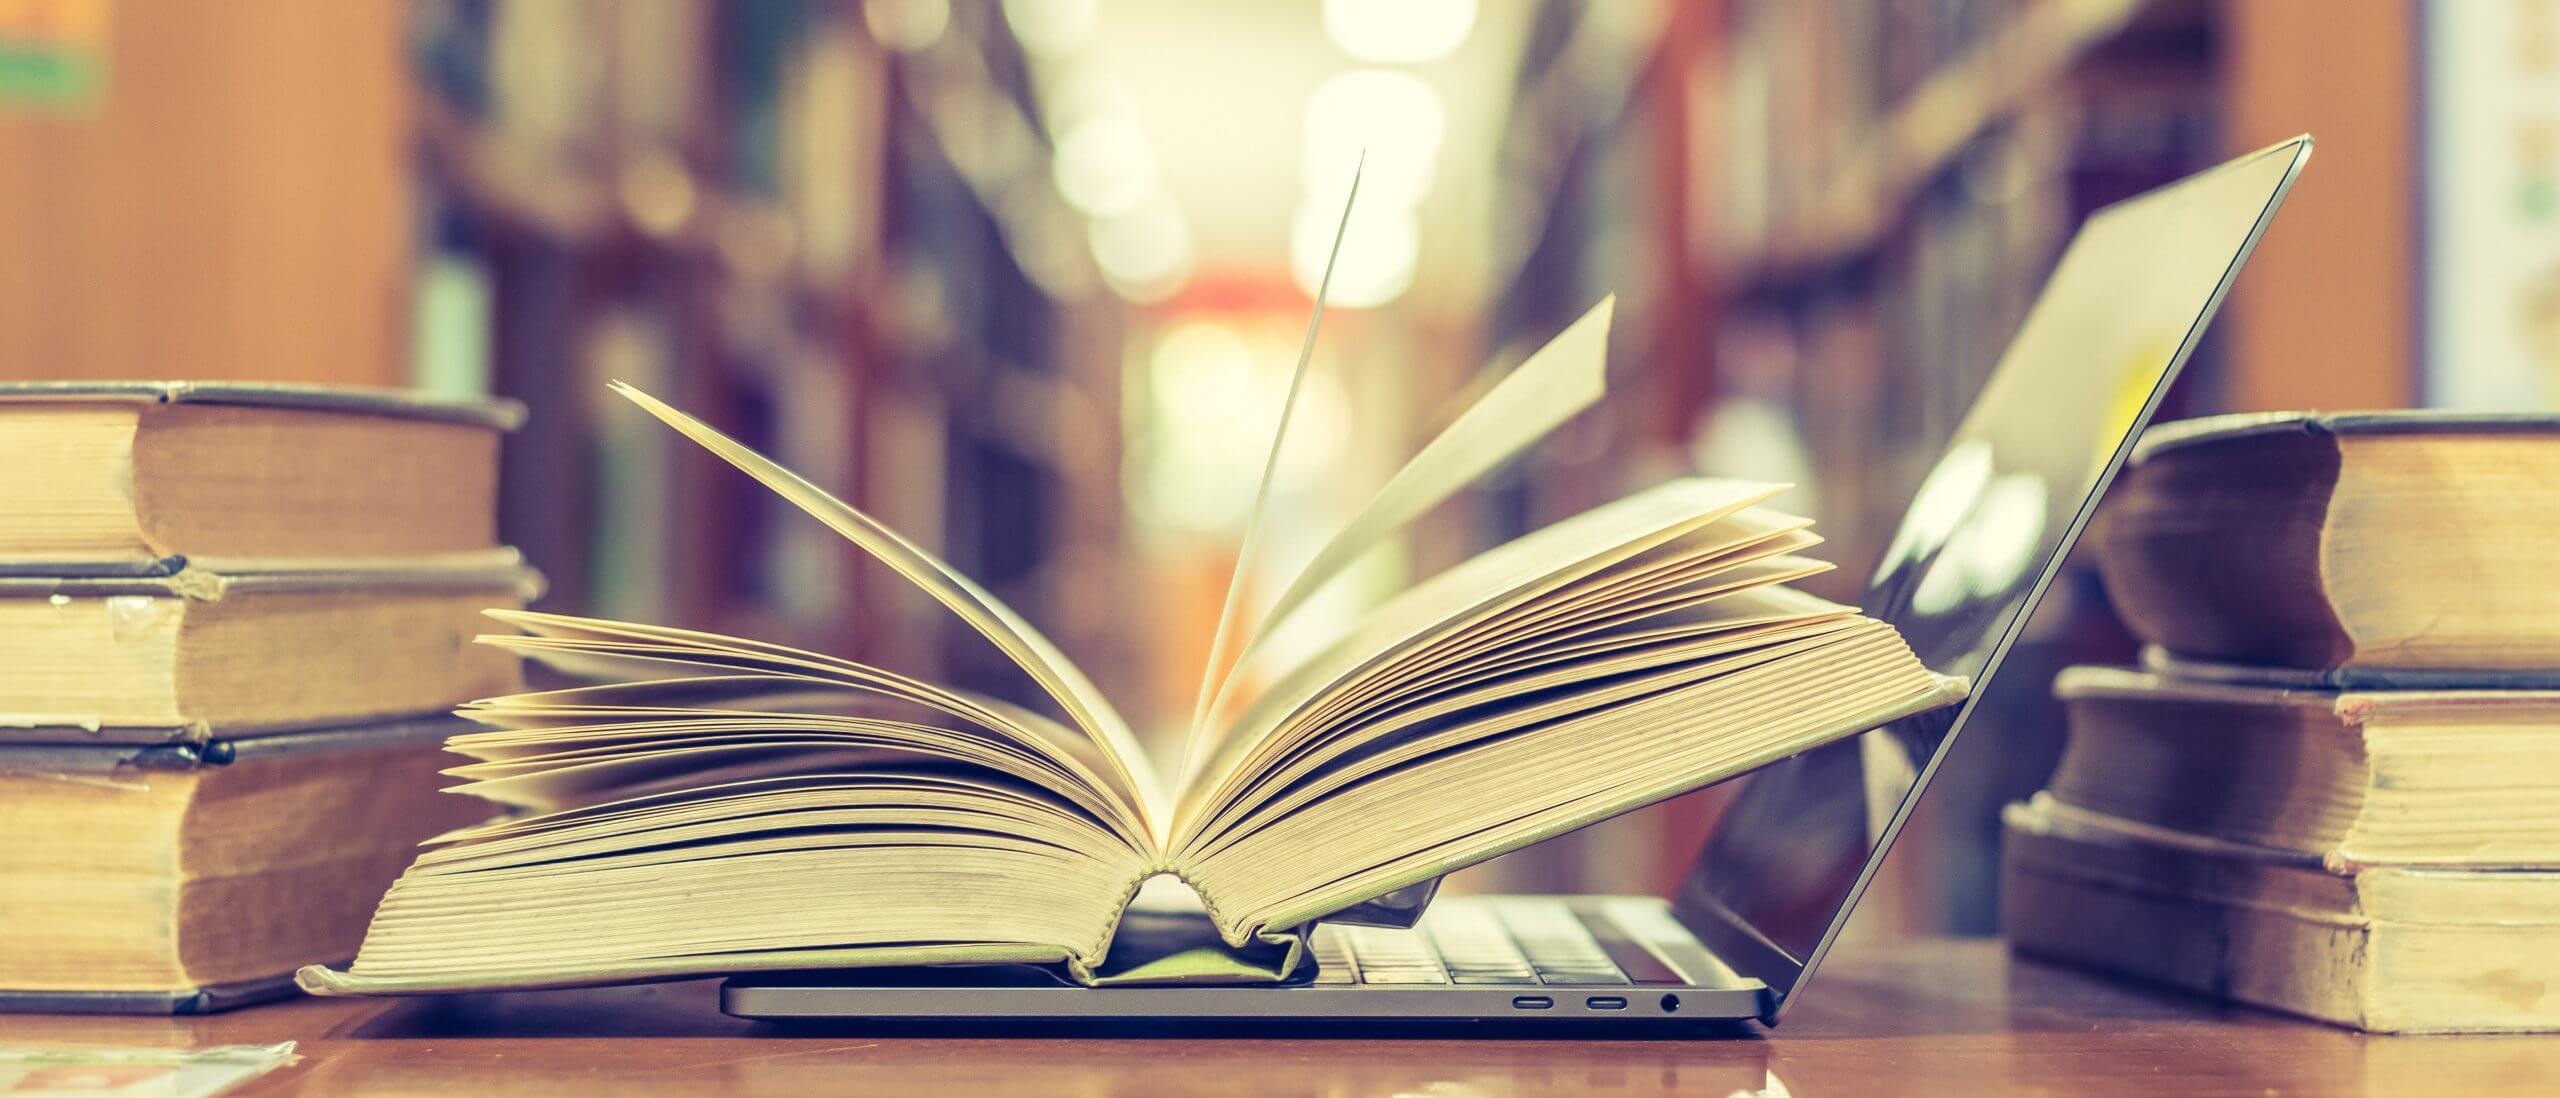 14 Best Software Development Books Recommended by our Developers